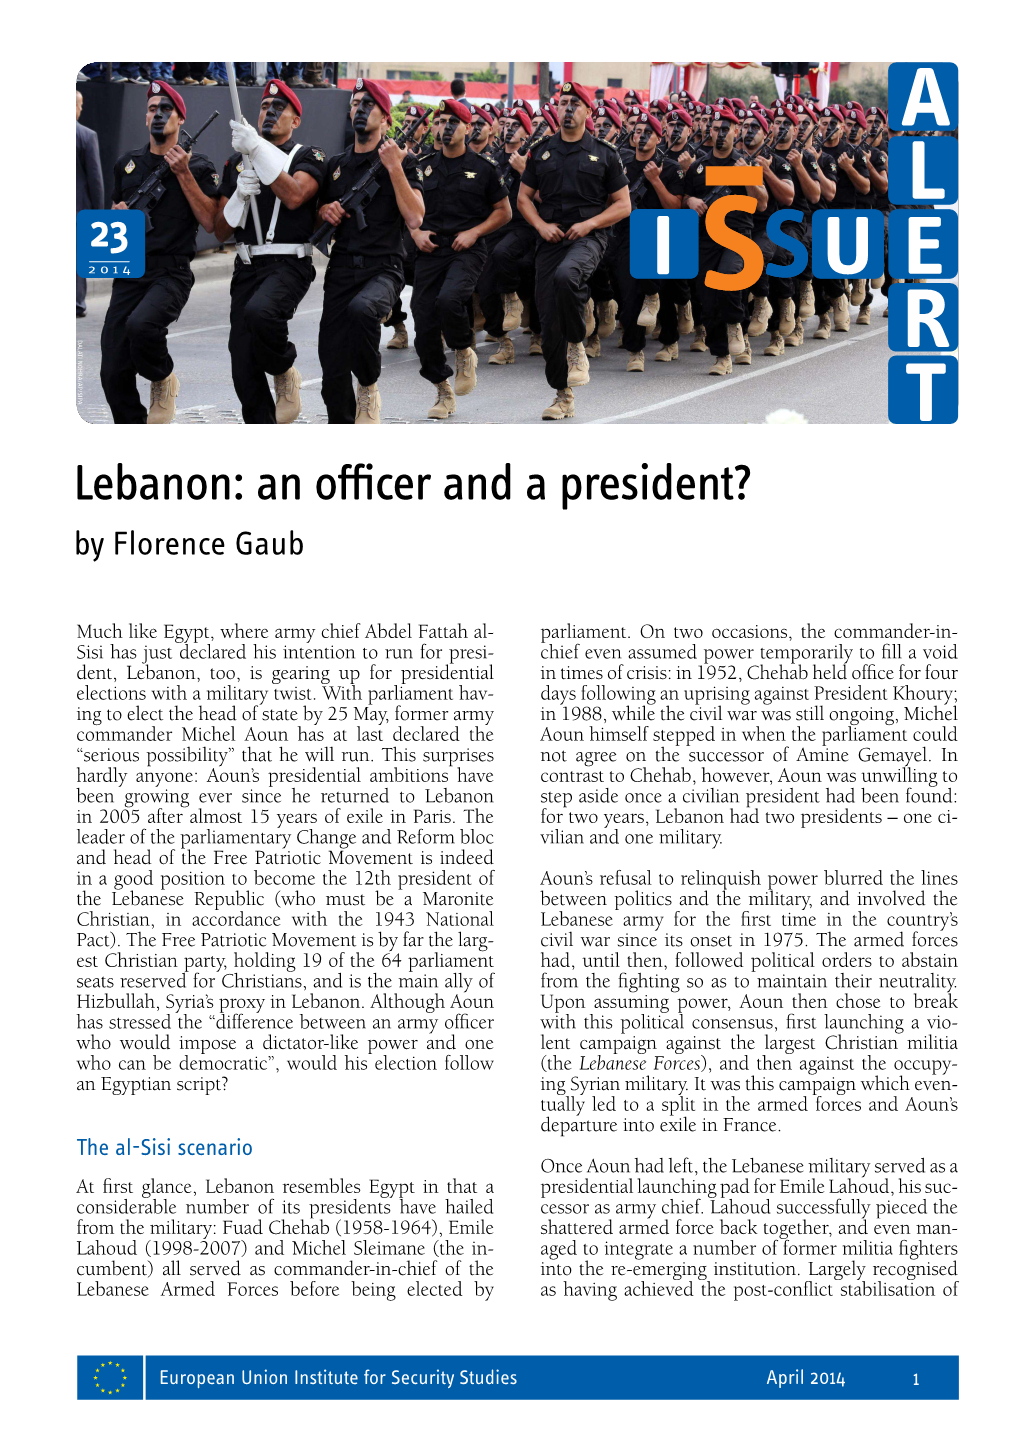 Lebanon: an Officer and a President? by Florence Gaub